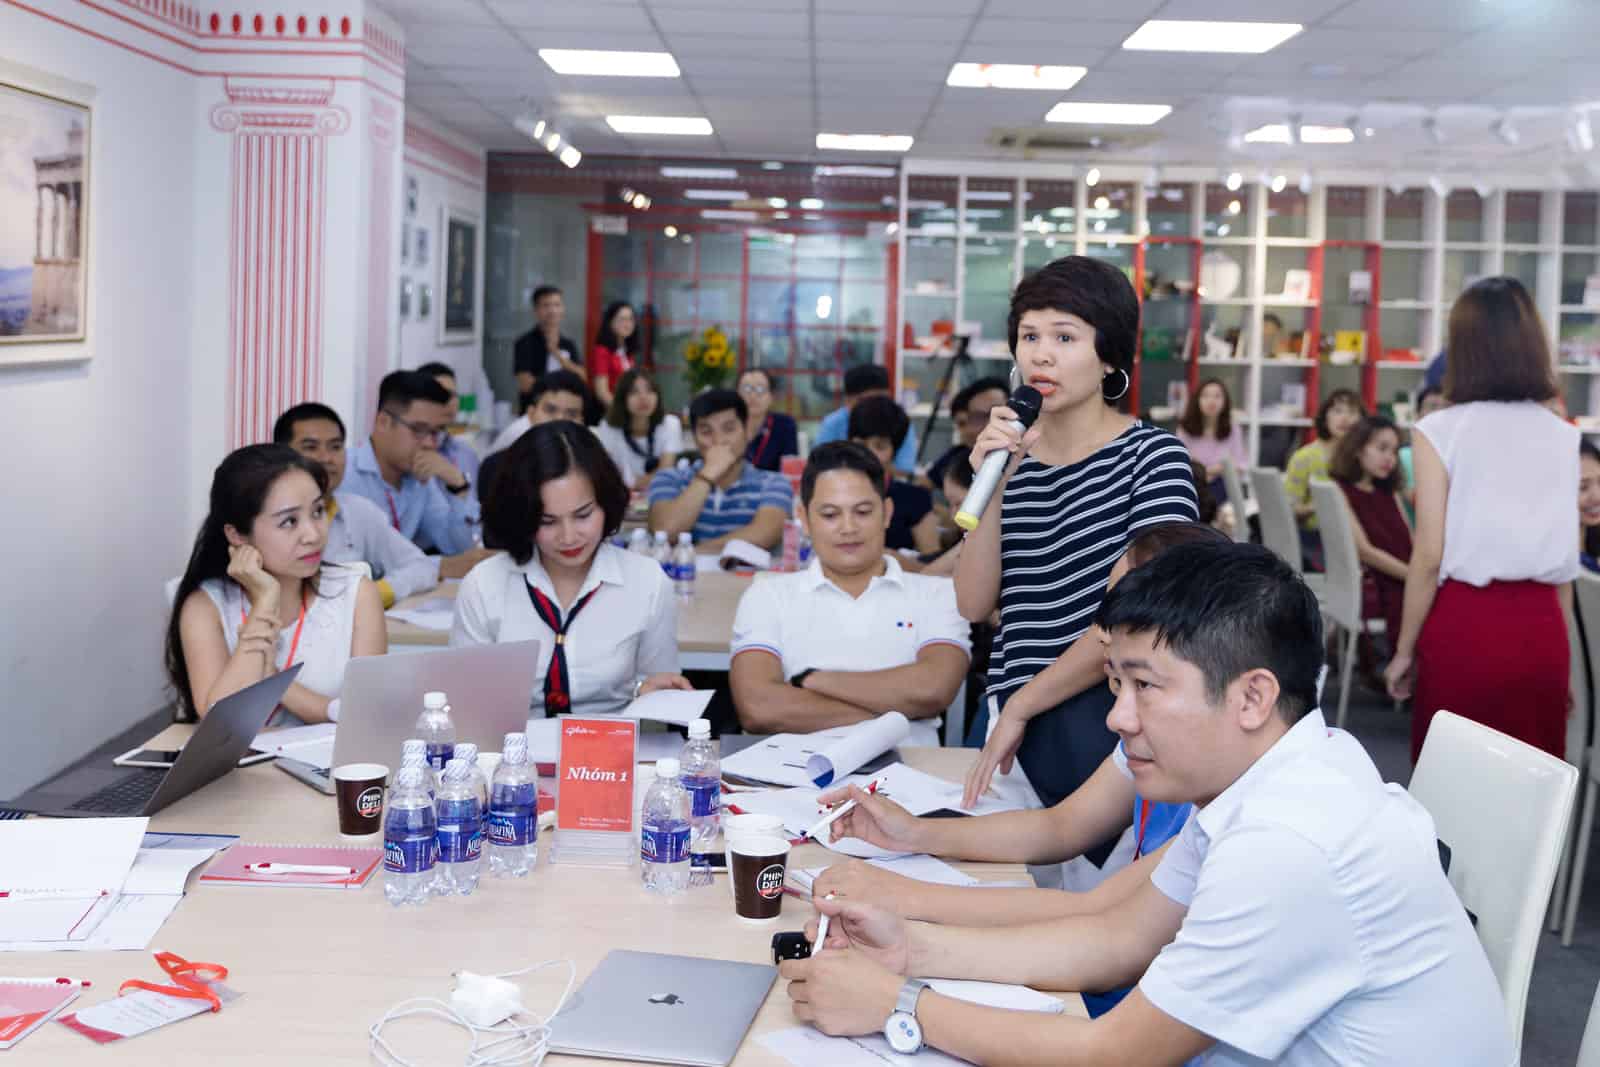 Business strategy for practitioners 01 – Lớp học tài năng.